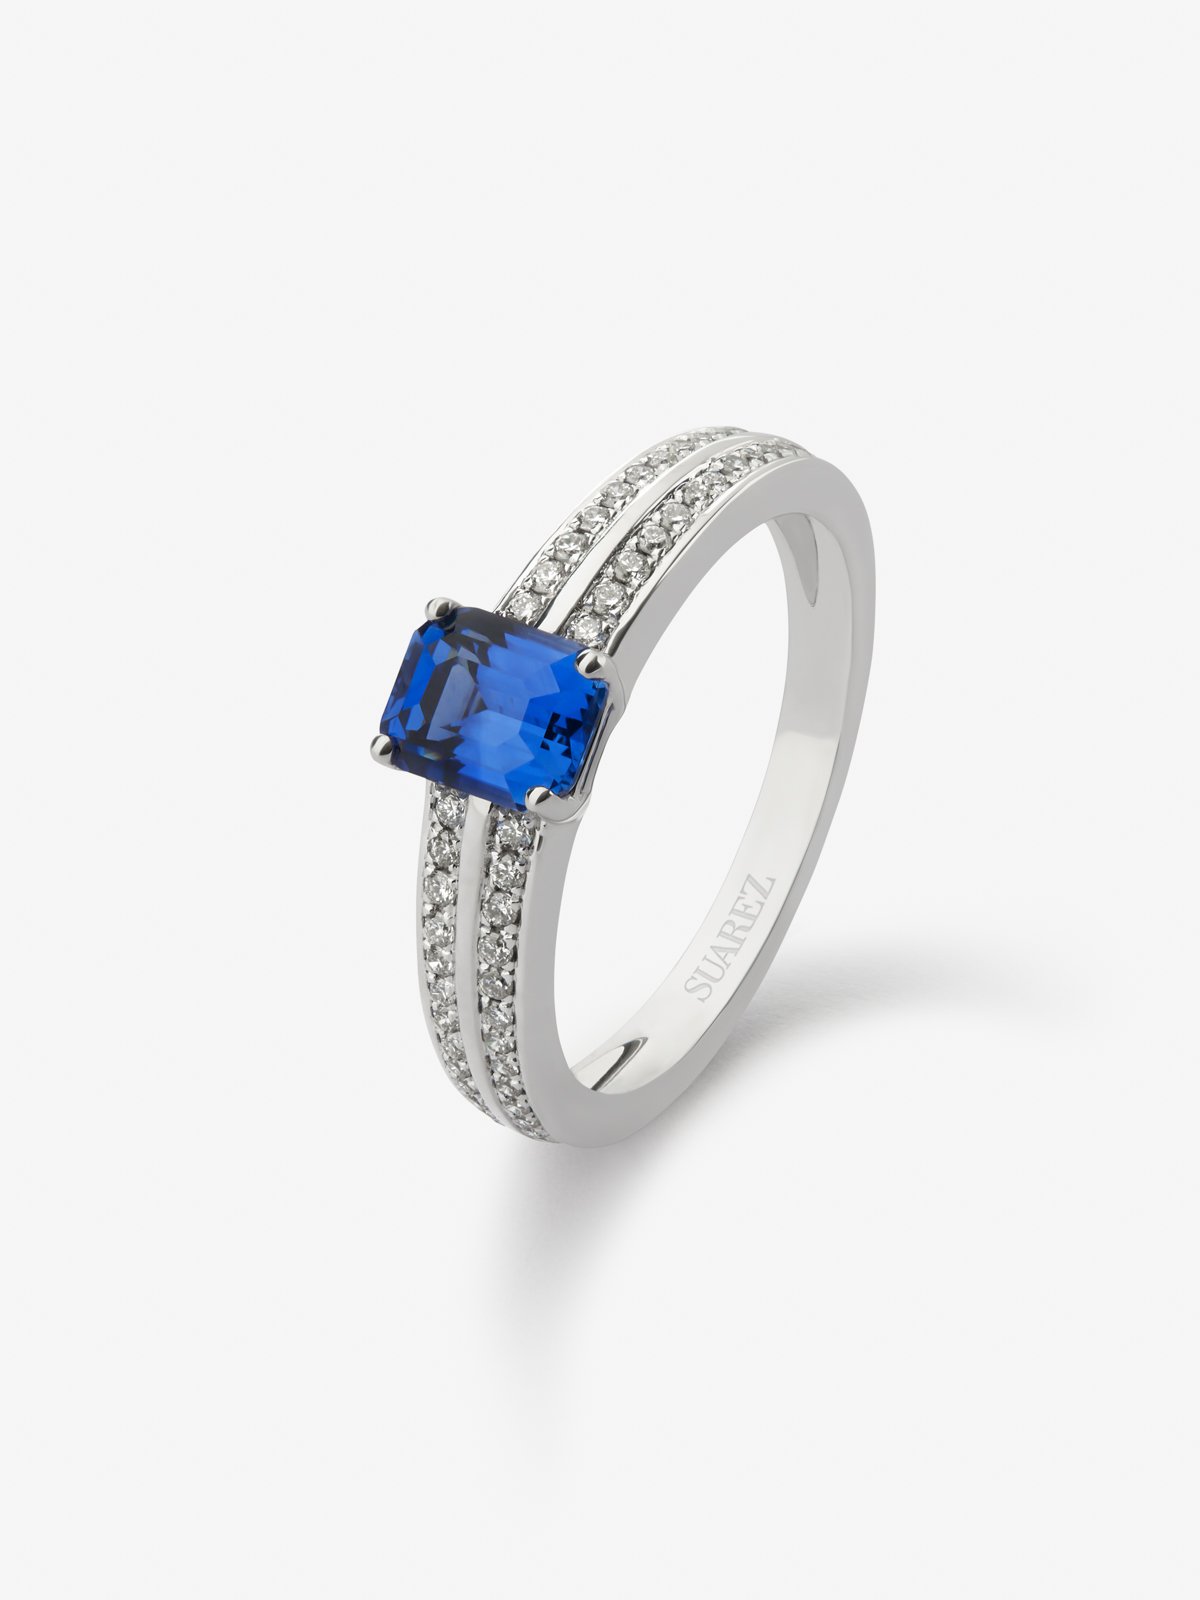 18K white gold ring with vivid blue sapphire in octagonal cut of 1.09 cts and 52 brilliant-cut diamonds with a total of 0.18 cts